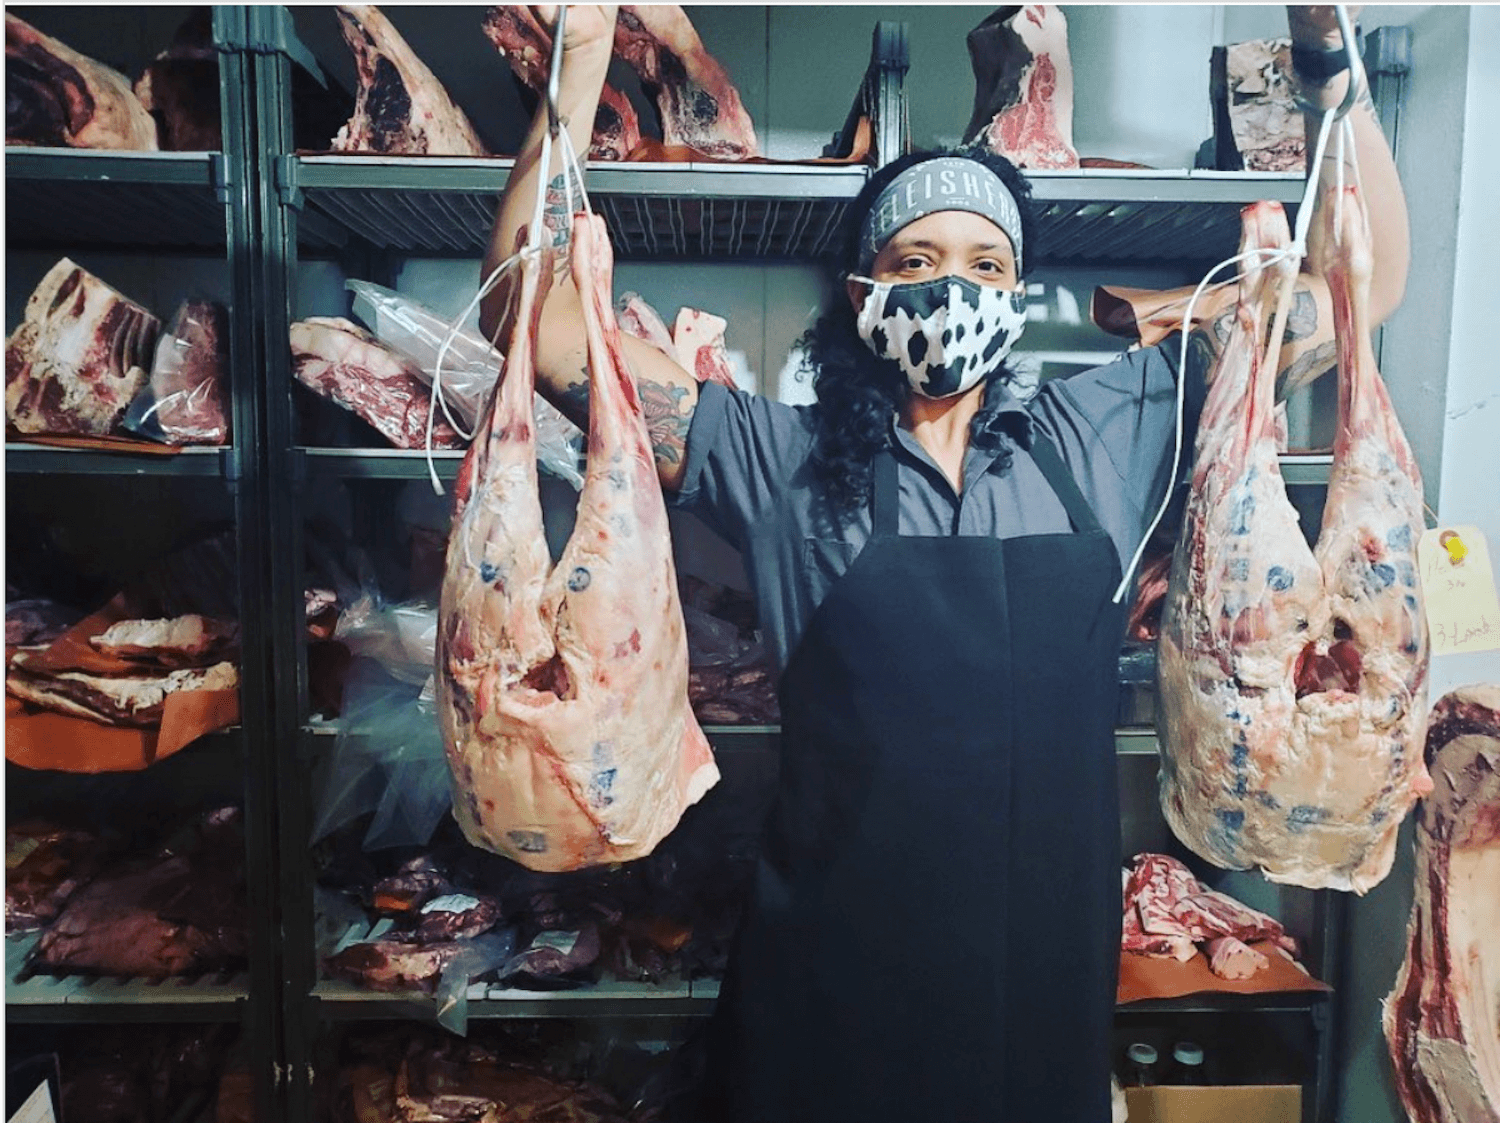 Jade Golden standing in a meat locker with hanging carcasses. September 2021